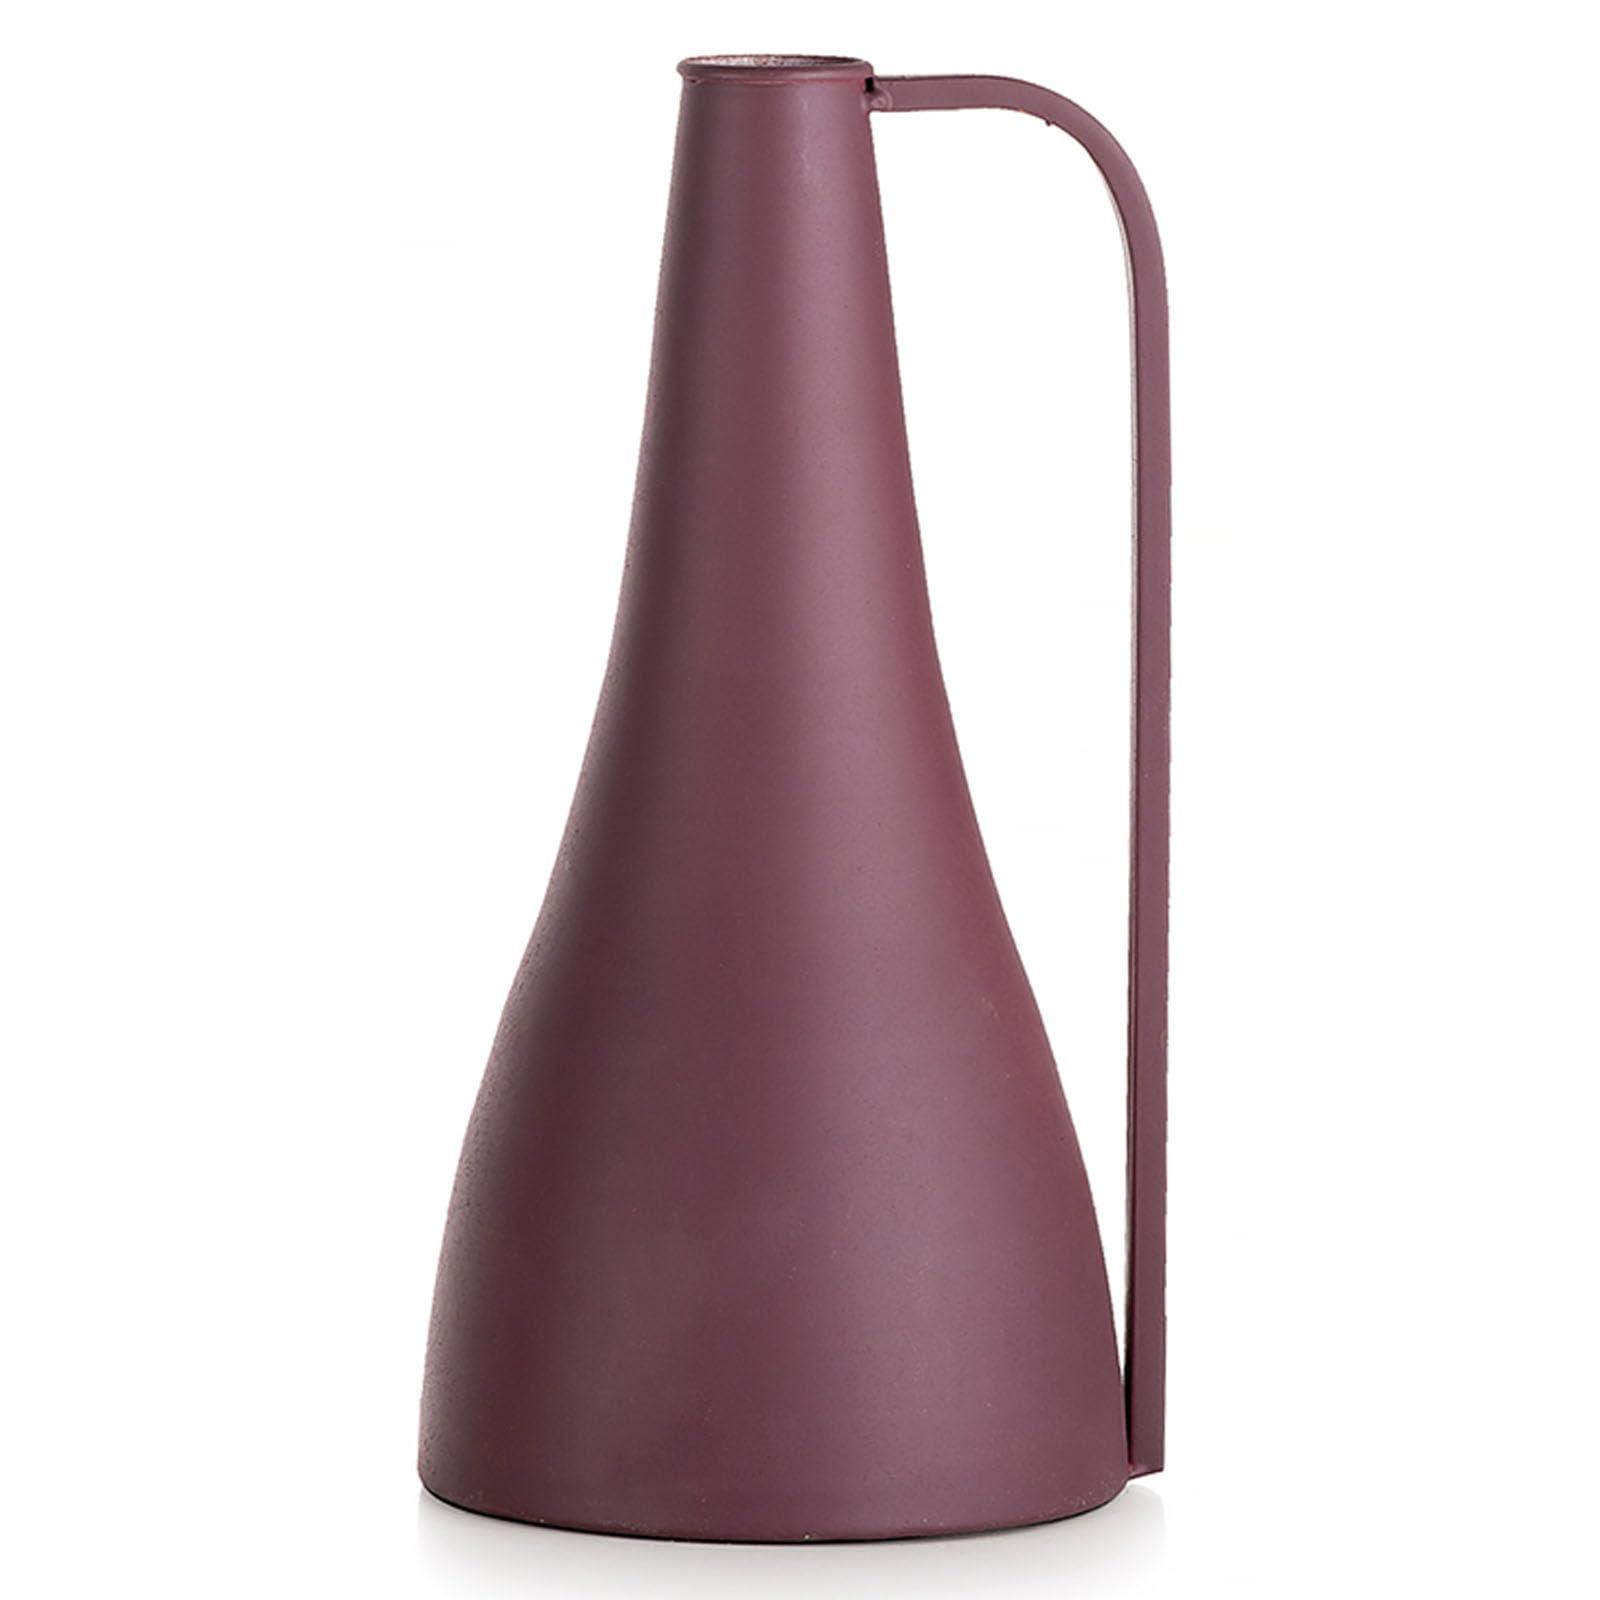 Sziqiqi Metal Pitcher Flowers Vases - 23.5cm Modern Vases with Handle Red Single Stem Vase for Table Morandi Narrow Neck Vases for Artificial Plants Love Gift for Mum Women Wife Sister 0